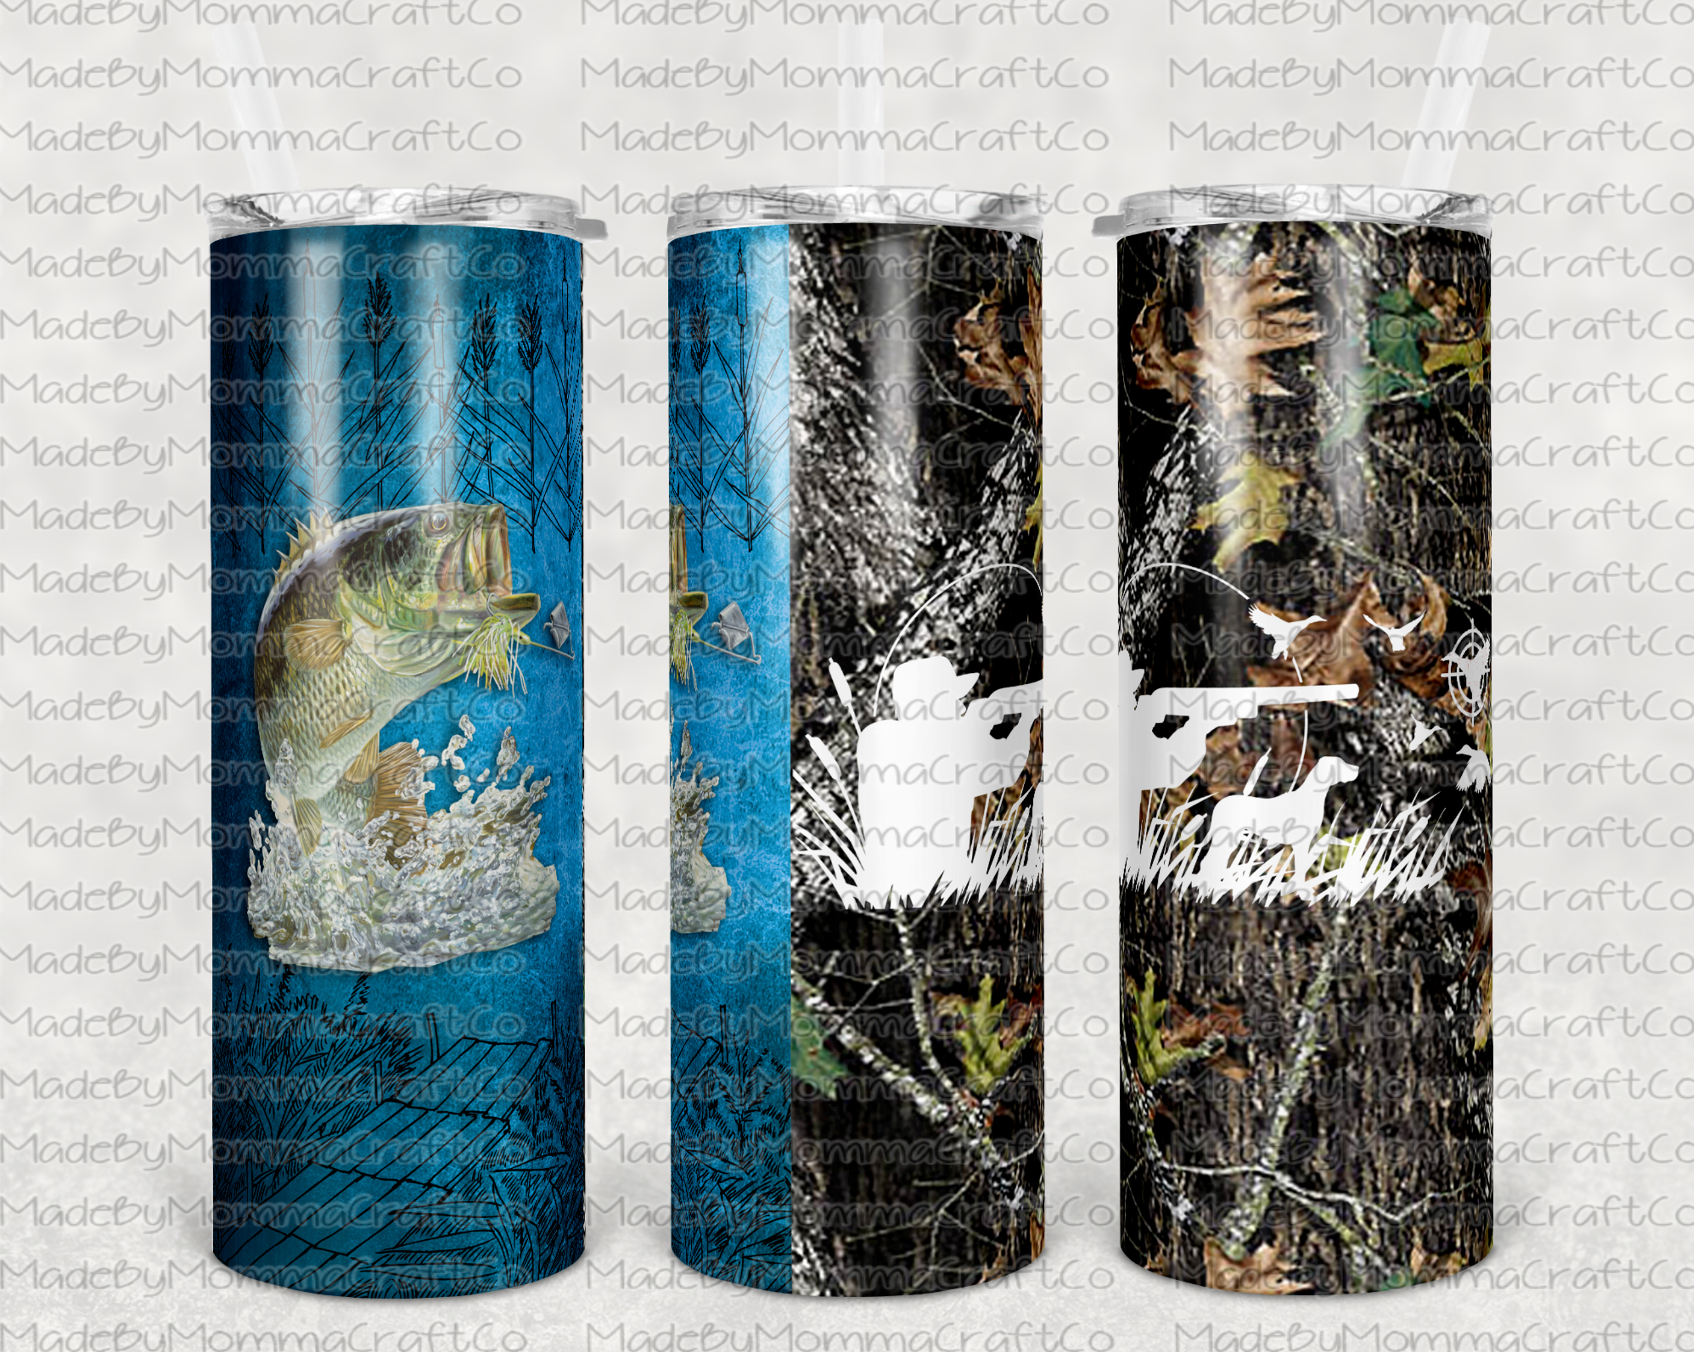 Camo Hunting and Fishing Manly Sublimation Tumbler Wrap - Or Clear Wat –  Made By Momma Waterslides